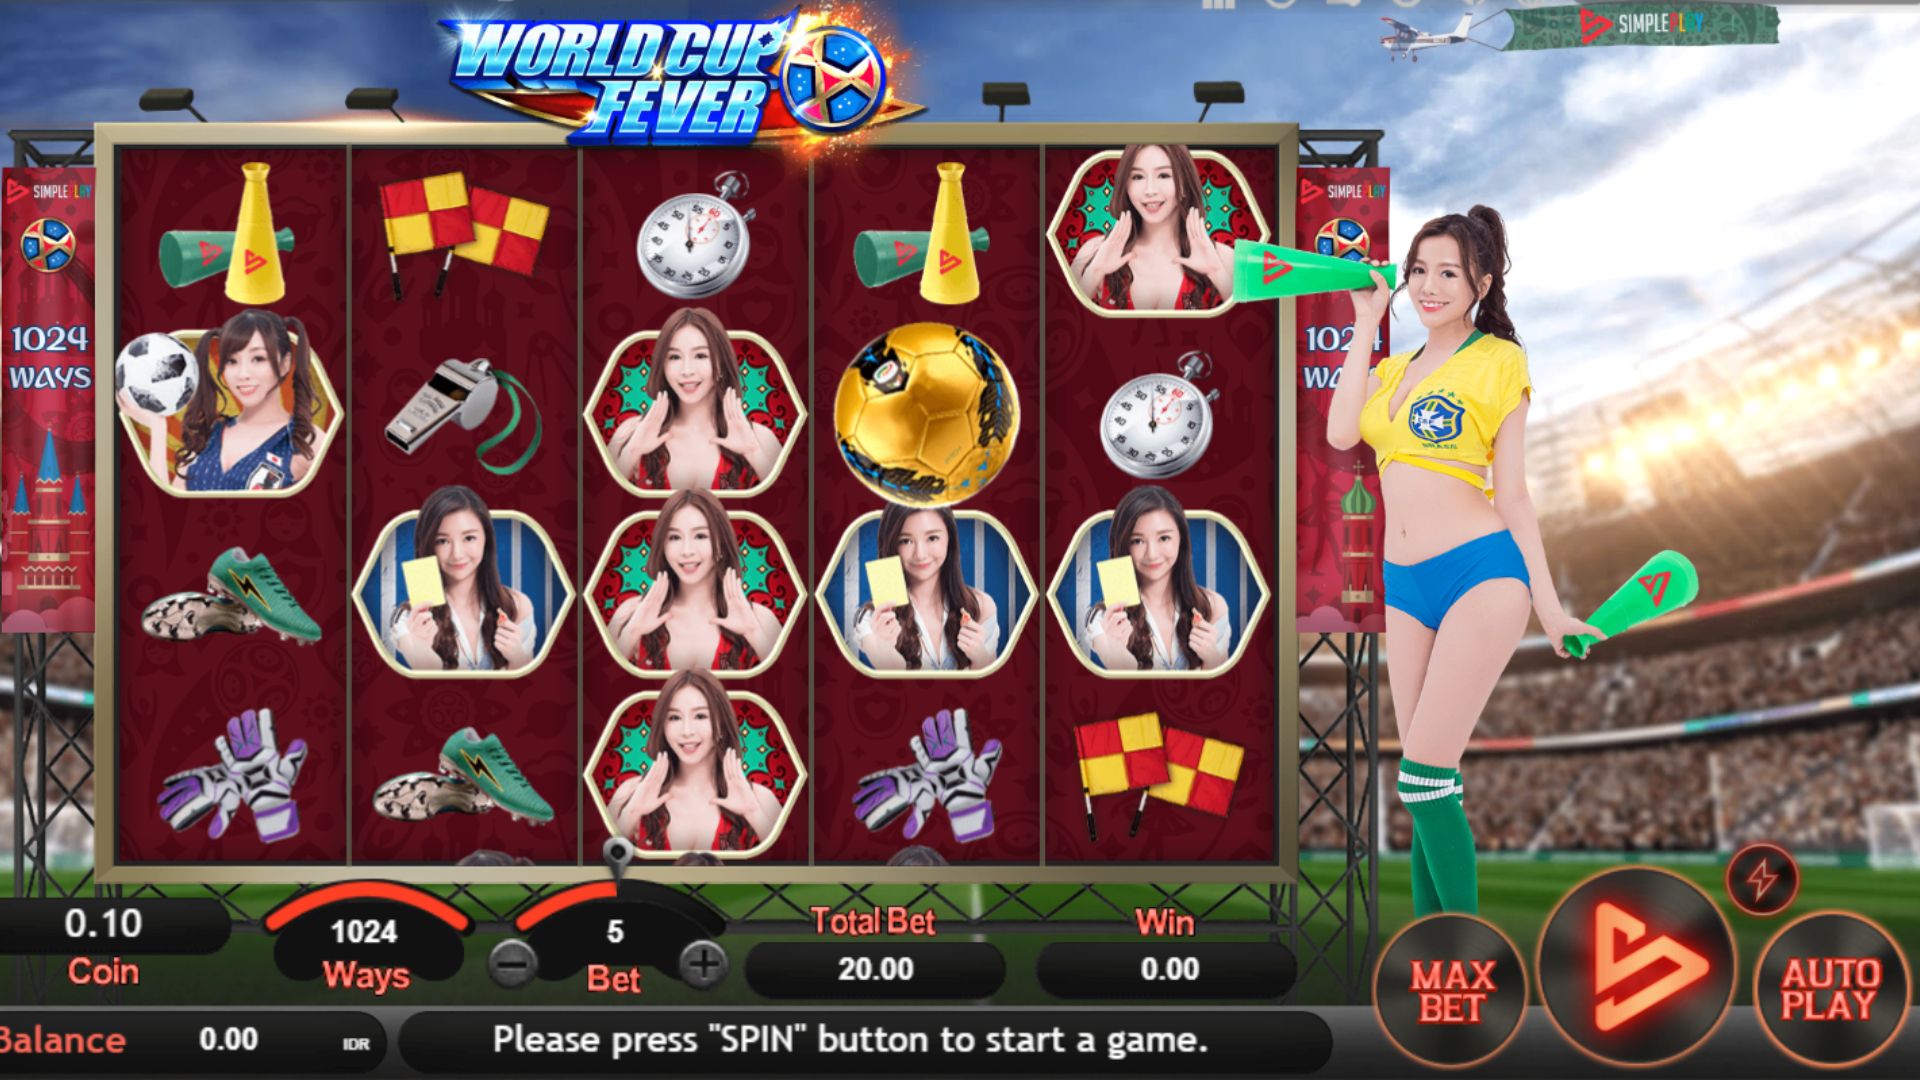 gameplay slot world cup fever